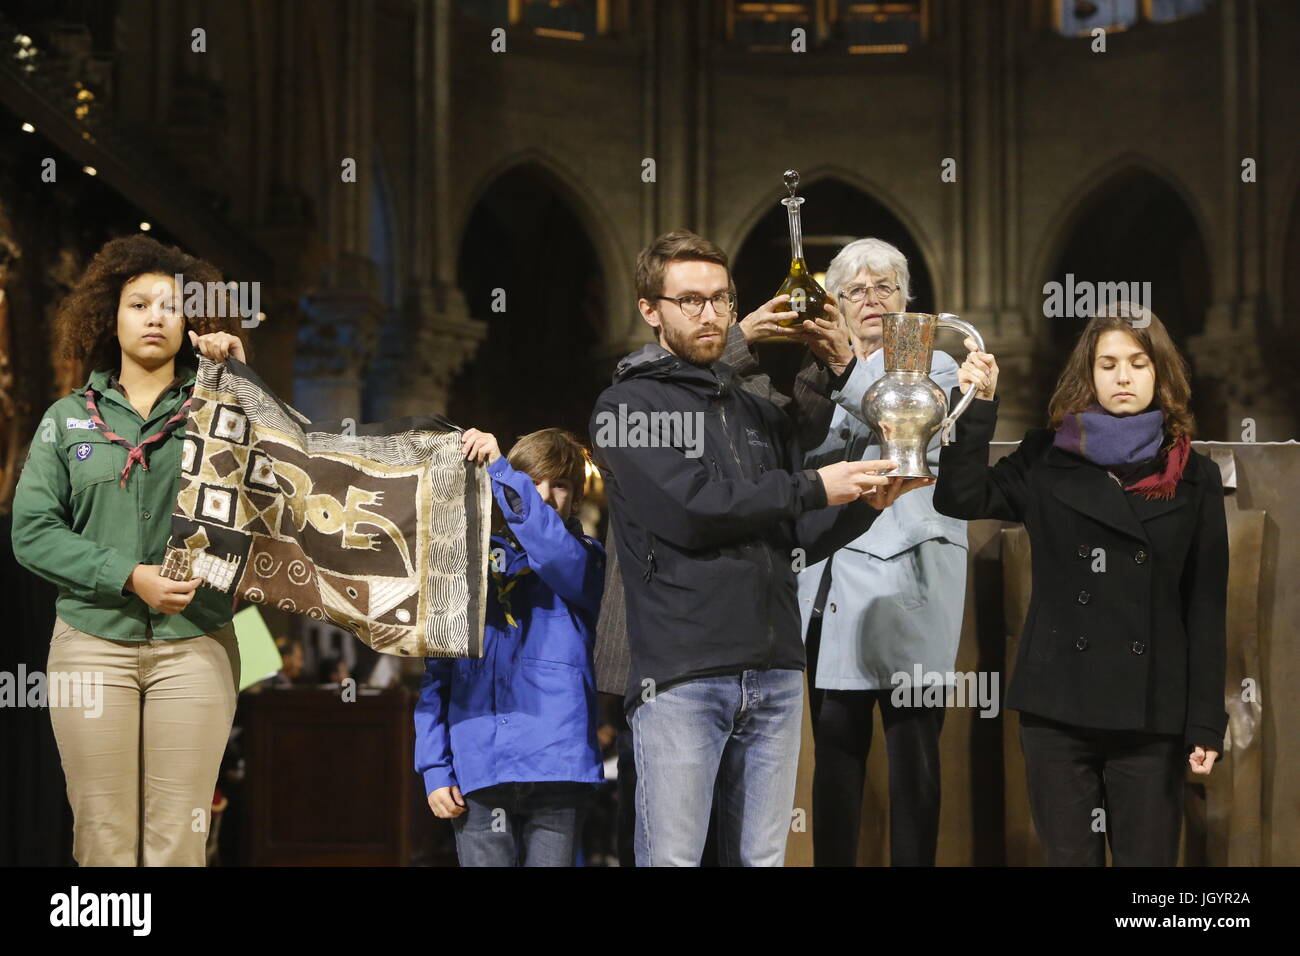 Ecumenical celebration in Notre Dame cathedral, Paris during the COP21 Climate Summit. Stock Photo